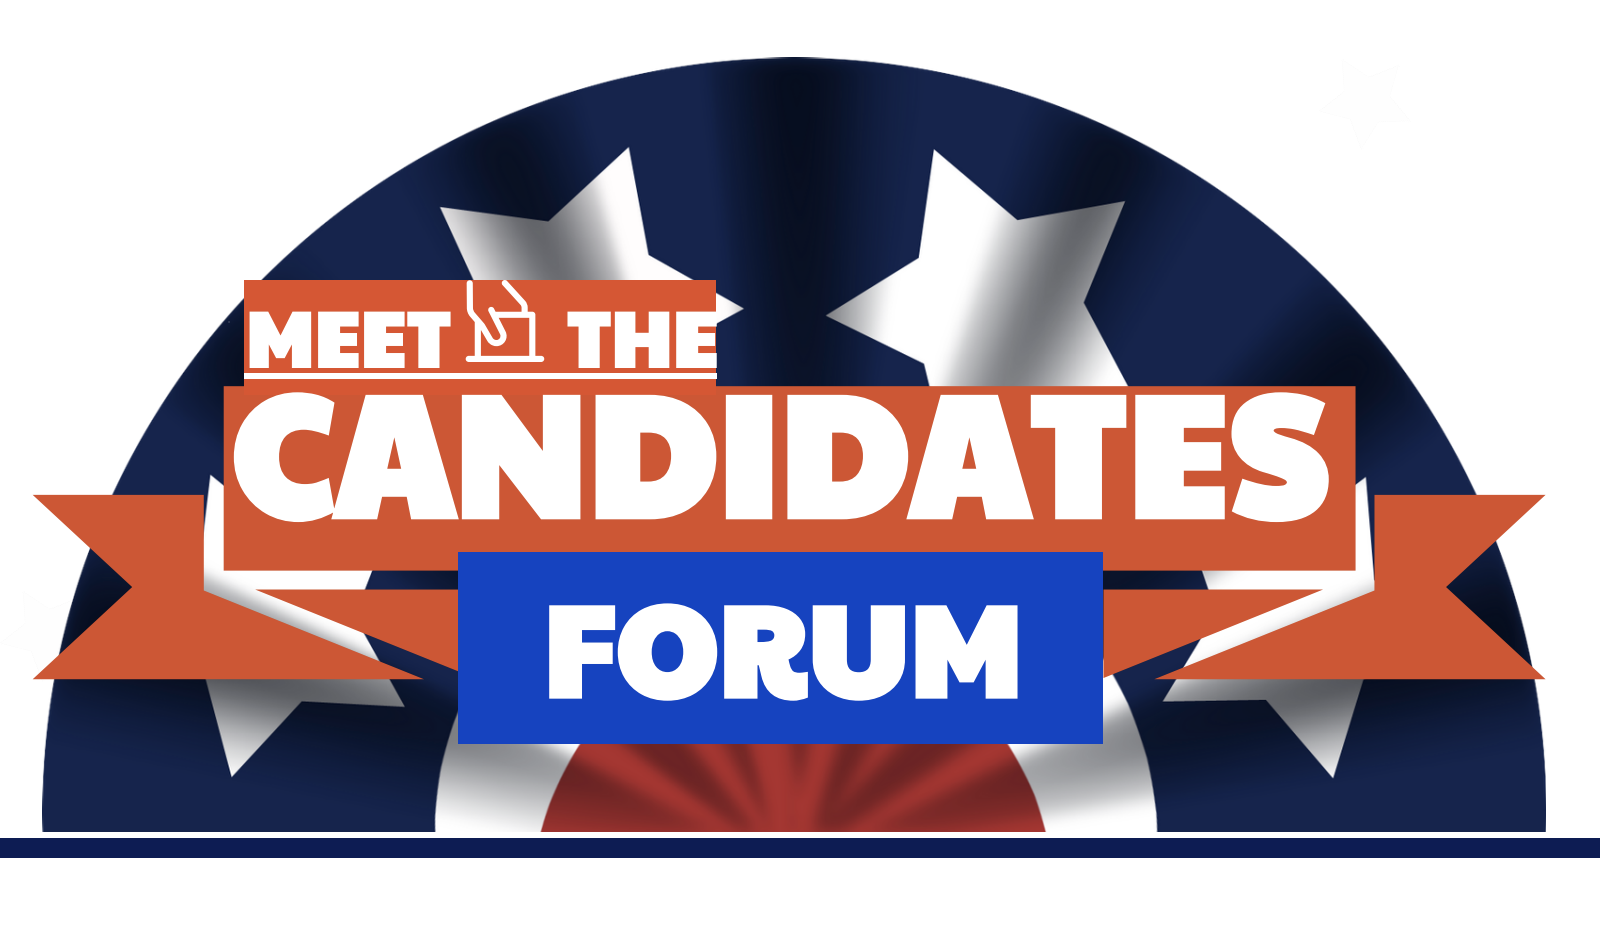 Meet the Candidates Forum graphic